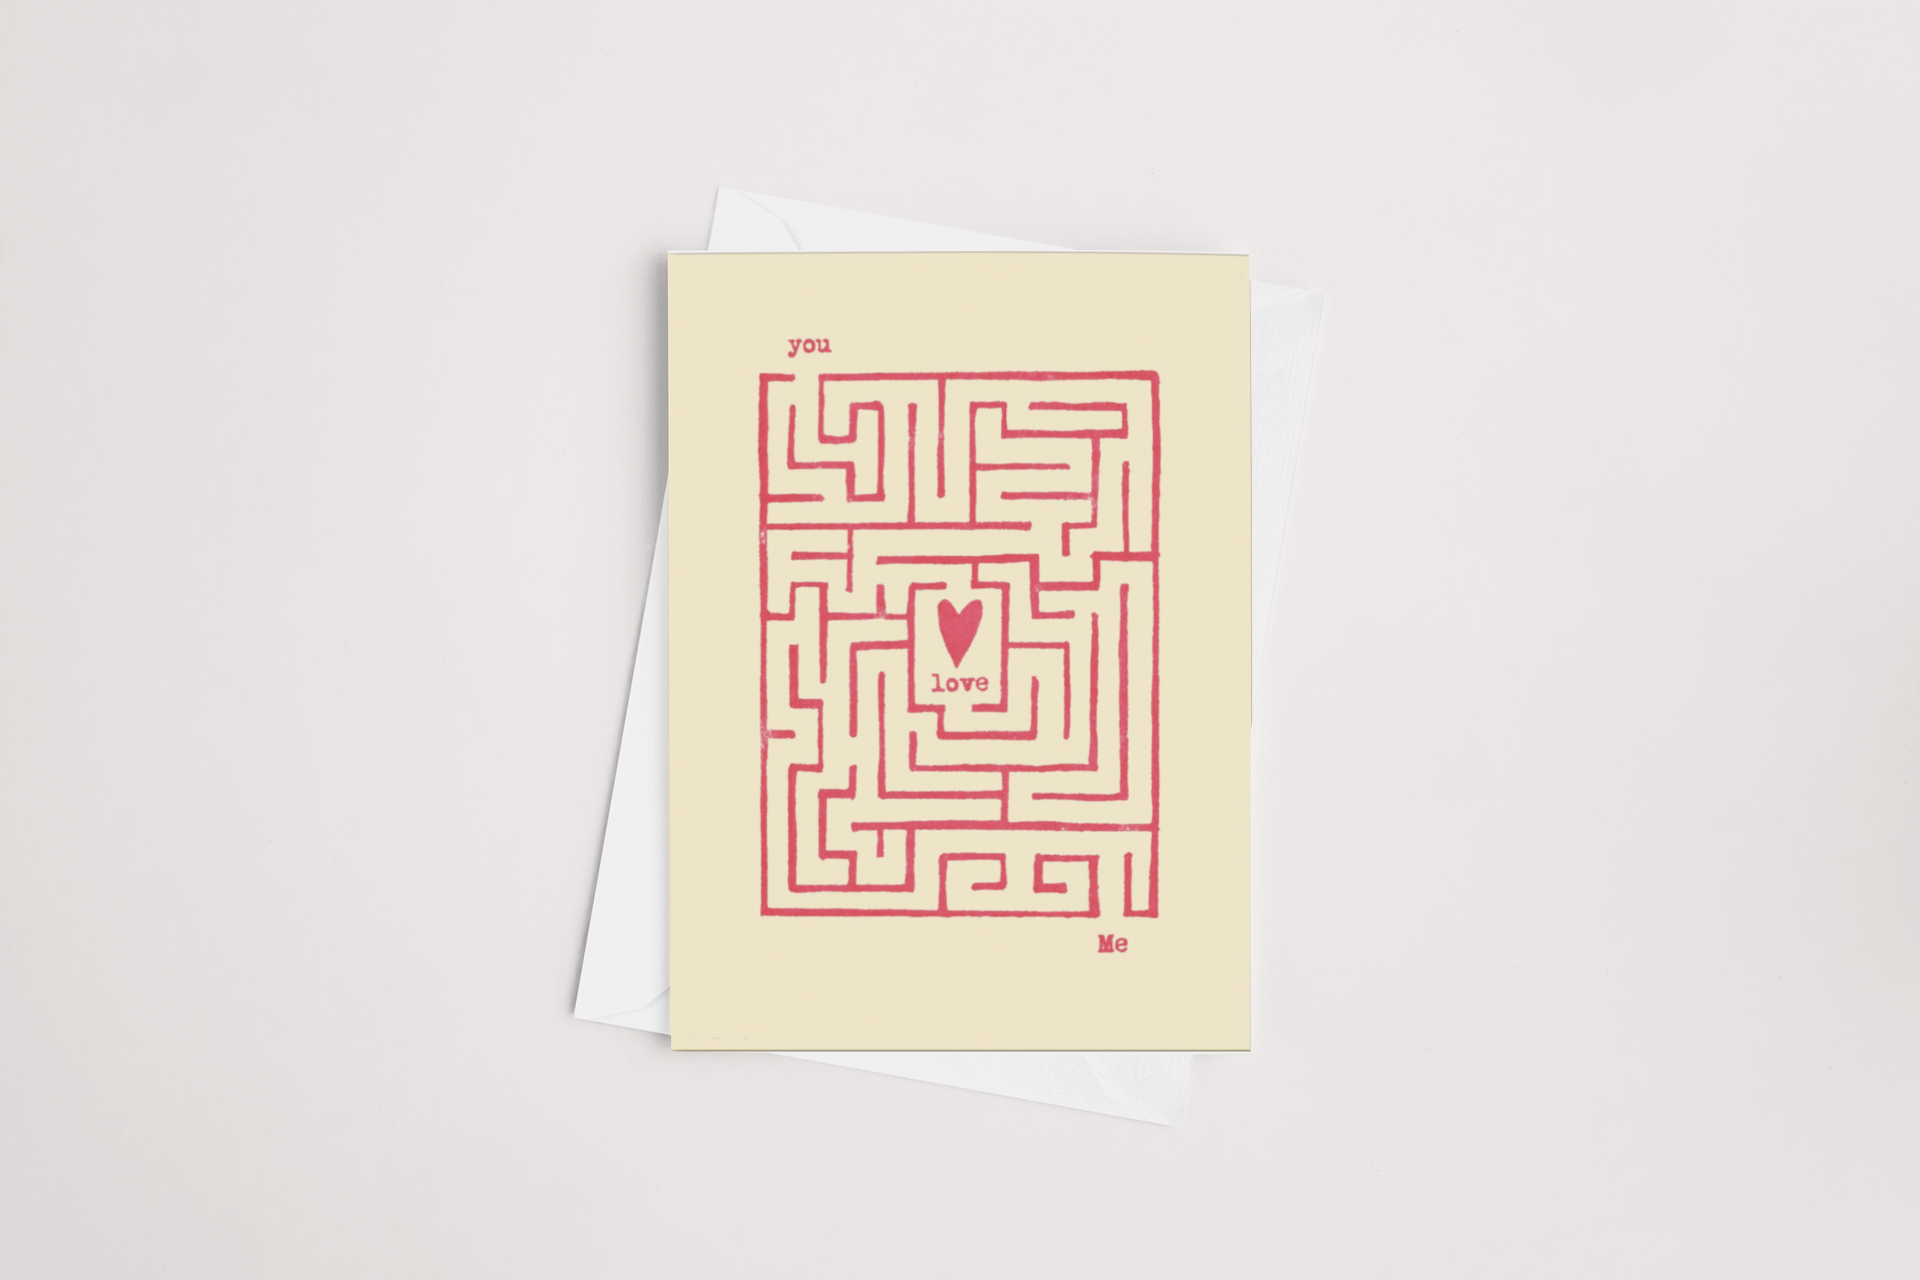 A Found Love Card, Product of New Zealand by Tuesday Print, with a heart-shaped maze design, where "you" and "me" lead to the word "love" at the center, symbolizing a journey to